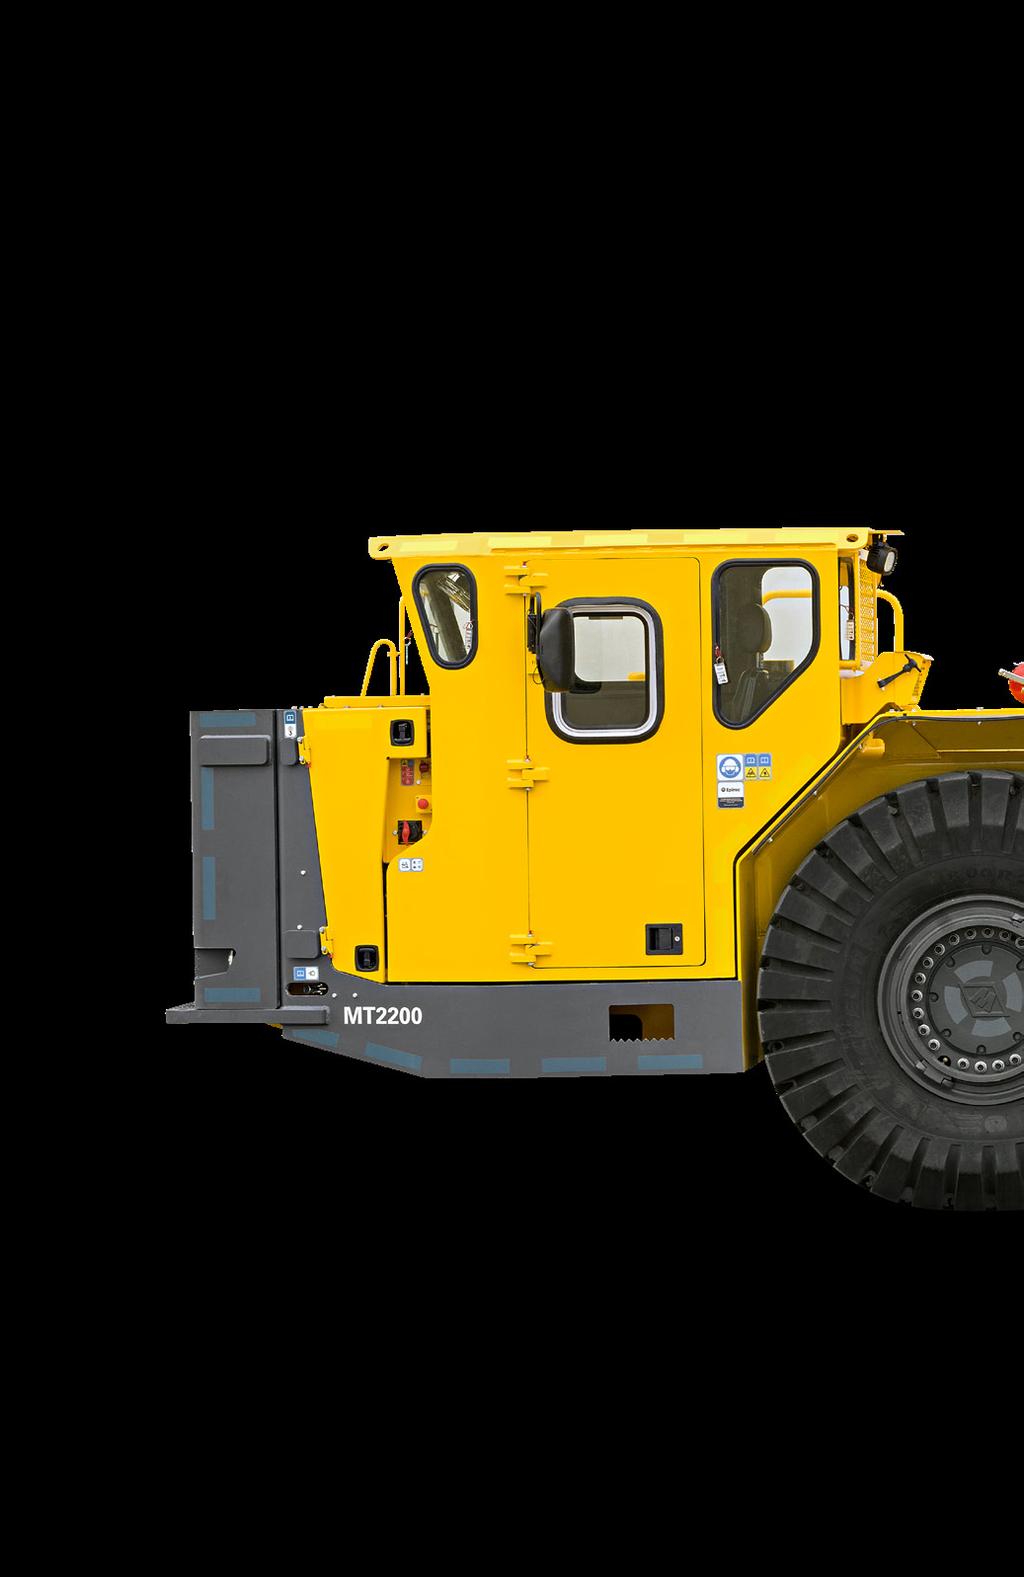 Productive and reliable operations Minetruck MT2200 is a high-capacity truck built for fast, efficient underground haulage.